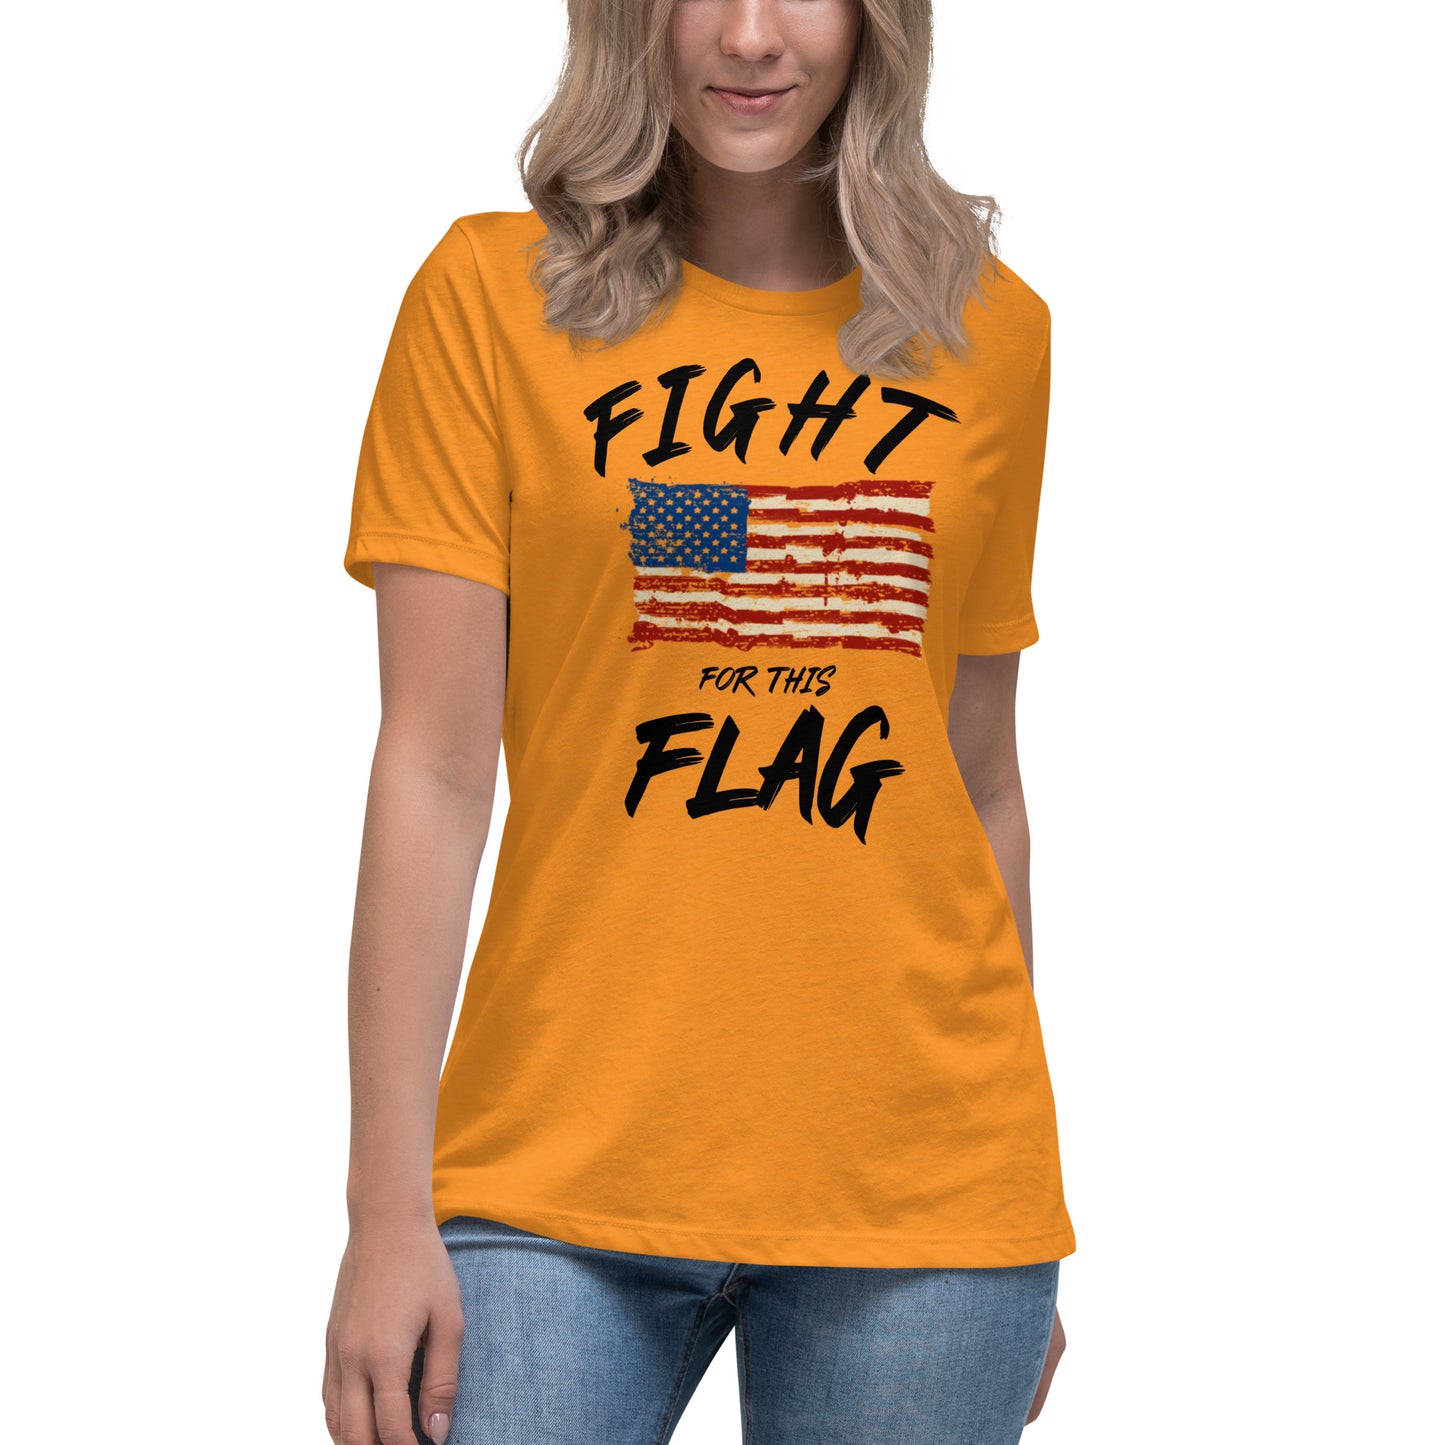 Fight for this Flag women's tee (black lettering)